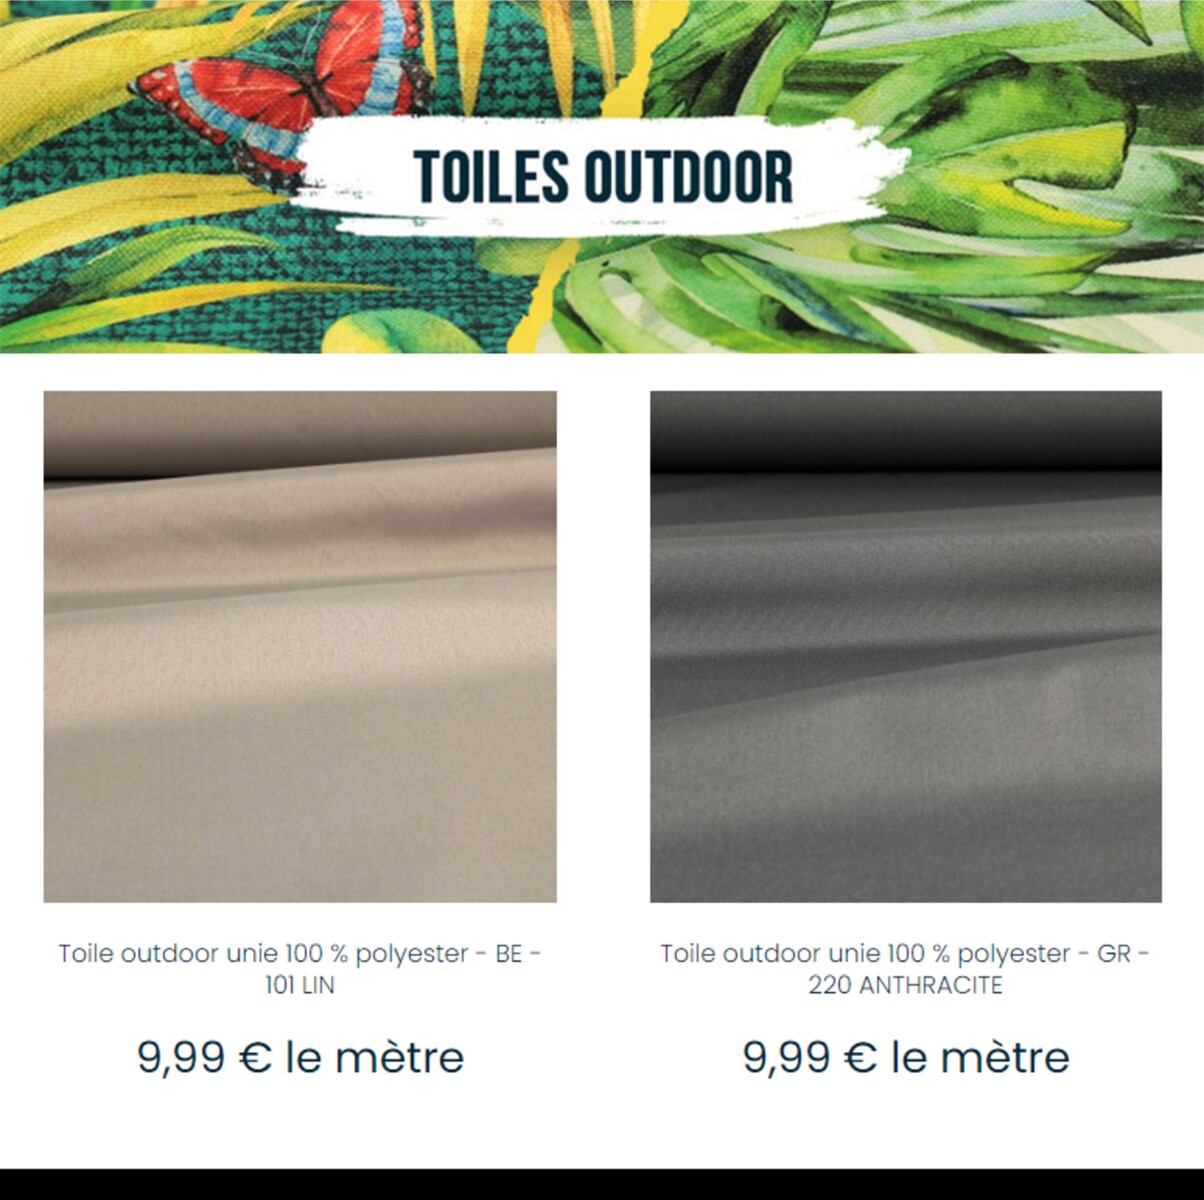 Catalogue TOILES OUTDOOR!, page 00004